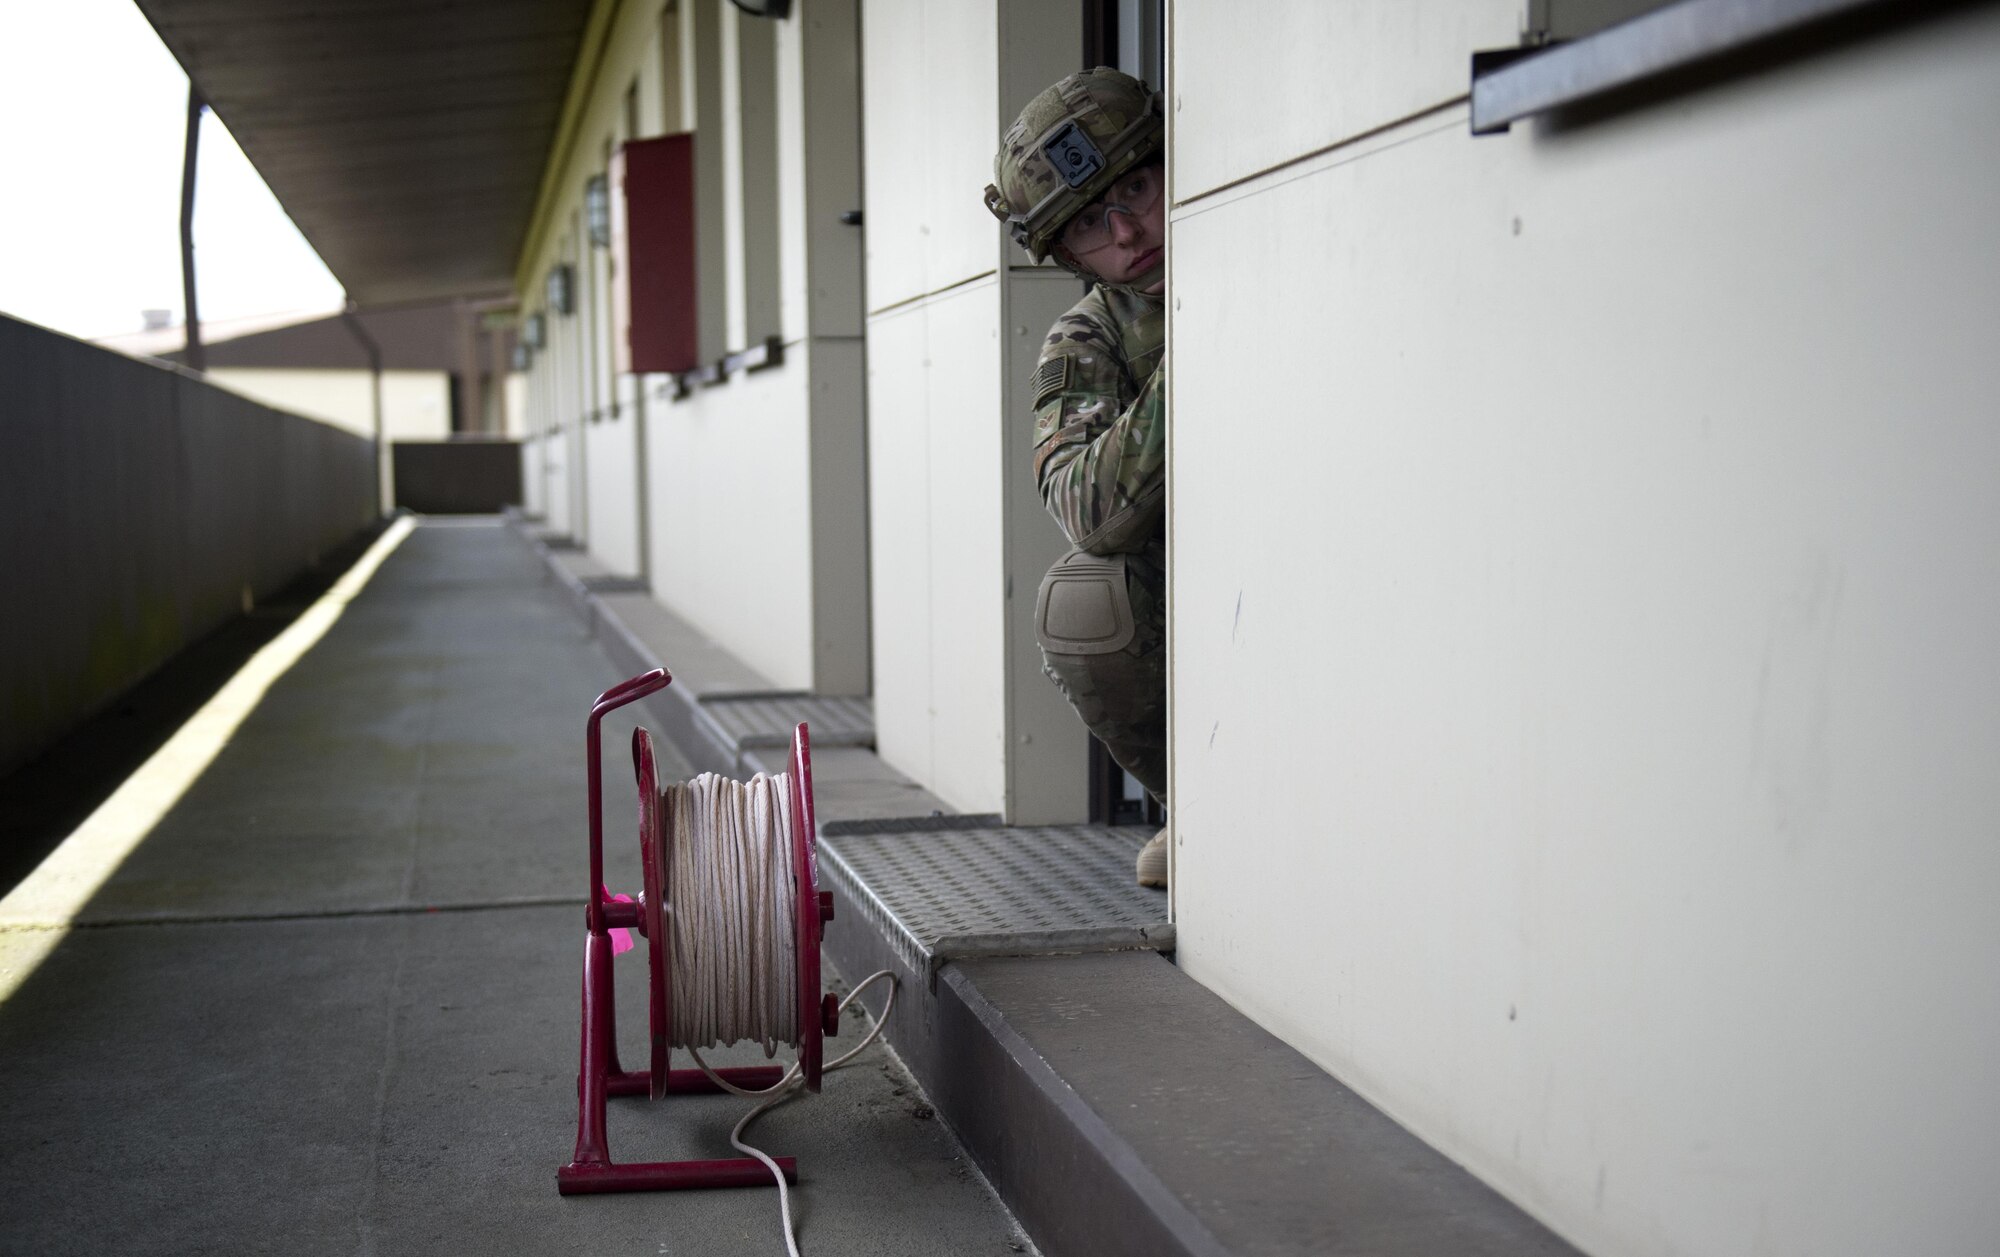 U.S. Air Force Senior Airman Vincent Miller, 52nd Civil Engineer Squadron explosive ordnance disposal team member, takes cover in a doorway during an Improvised Explosive Device Rodeo exercise at Spangdahlem Air Base, Germany, July 27, 2016. The exercise, known as the IED Rodeo, represented the first of its kind at Spangdahlem and featured a multilateral event showcasing EOD members from different branches and nations, how they locate explosive devices and the steps they take to safely and effectively disarm them. (U.S. Air Force photo by Airman 1st Class Preston L. Cherry/Realeased)